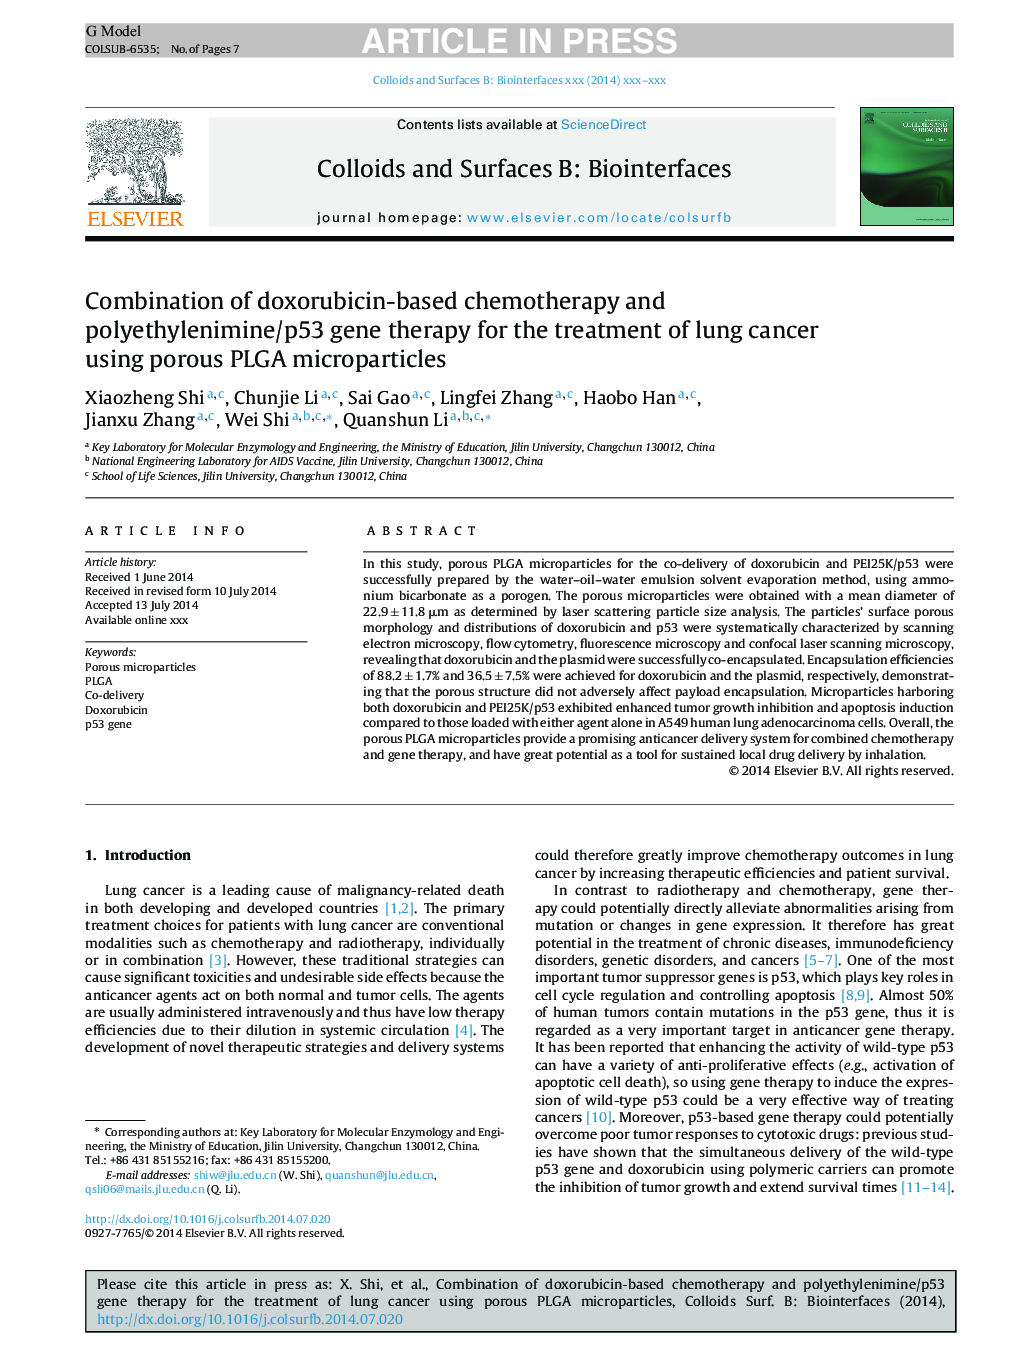 Combination of doxorubicin-based chemotherapy and polyethylenimine/p53 gene therapy for the treatment of lung cancer using porous PLGA microparticles